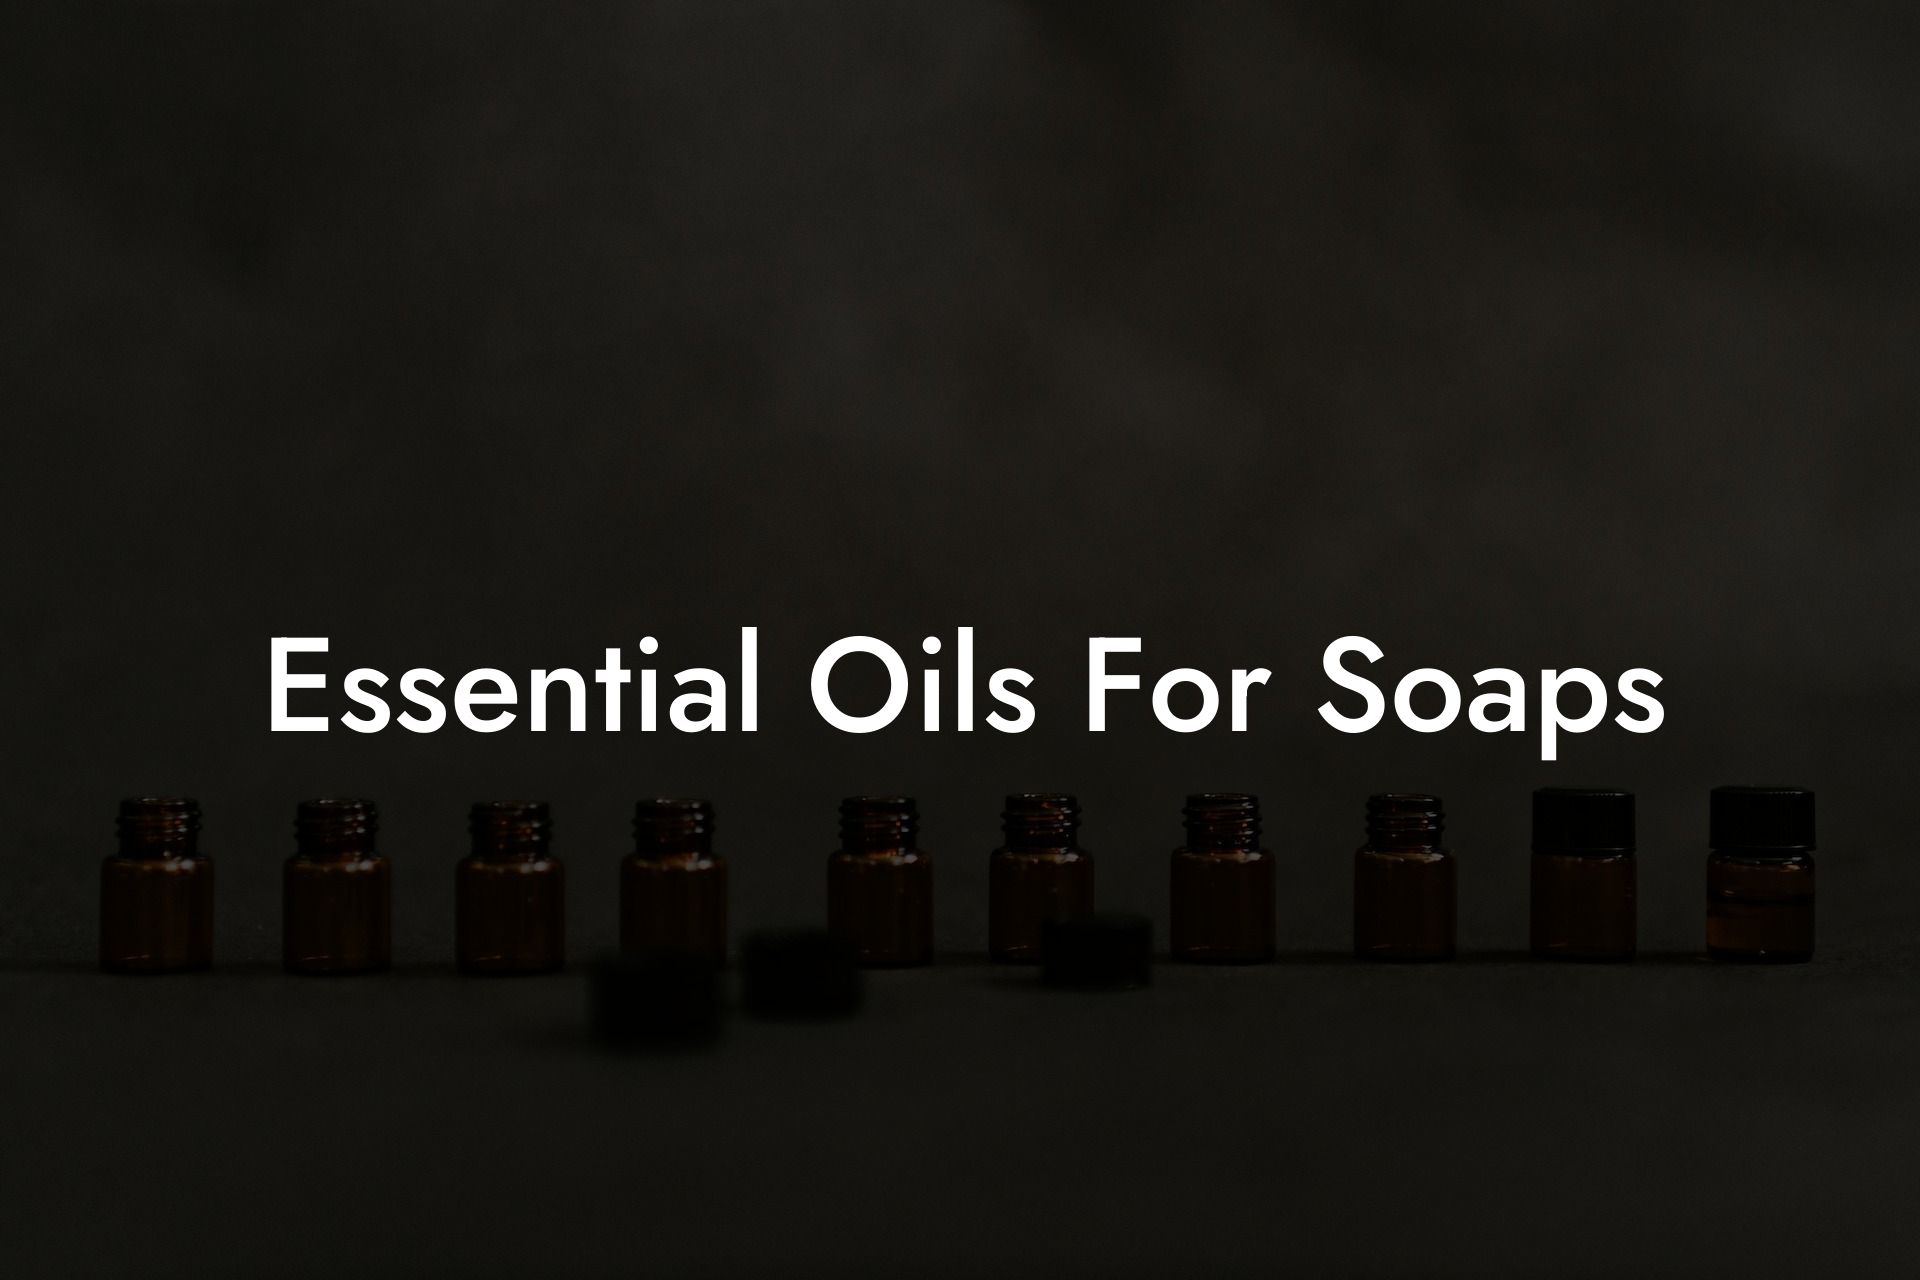 Essential Oils For Soaps